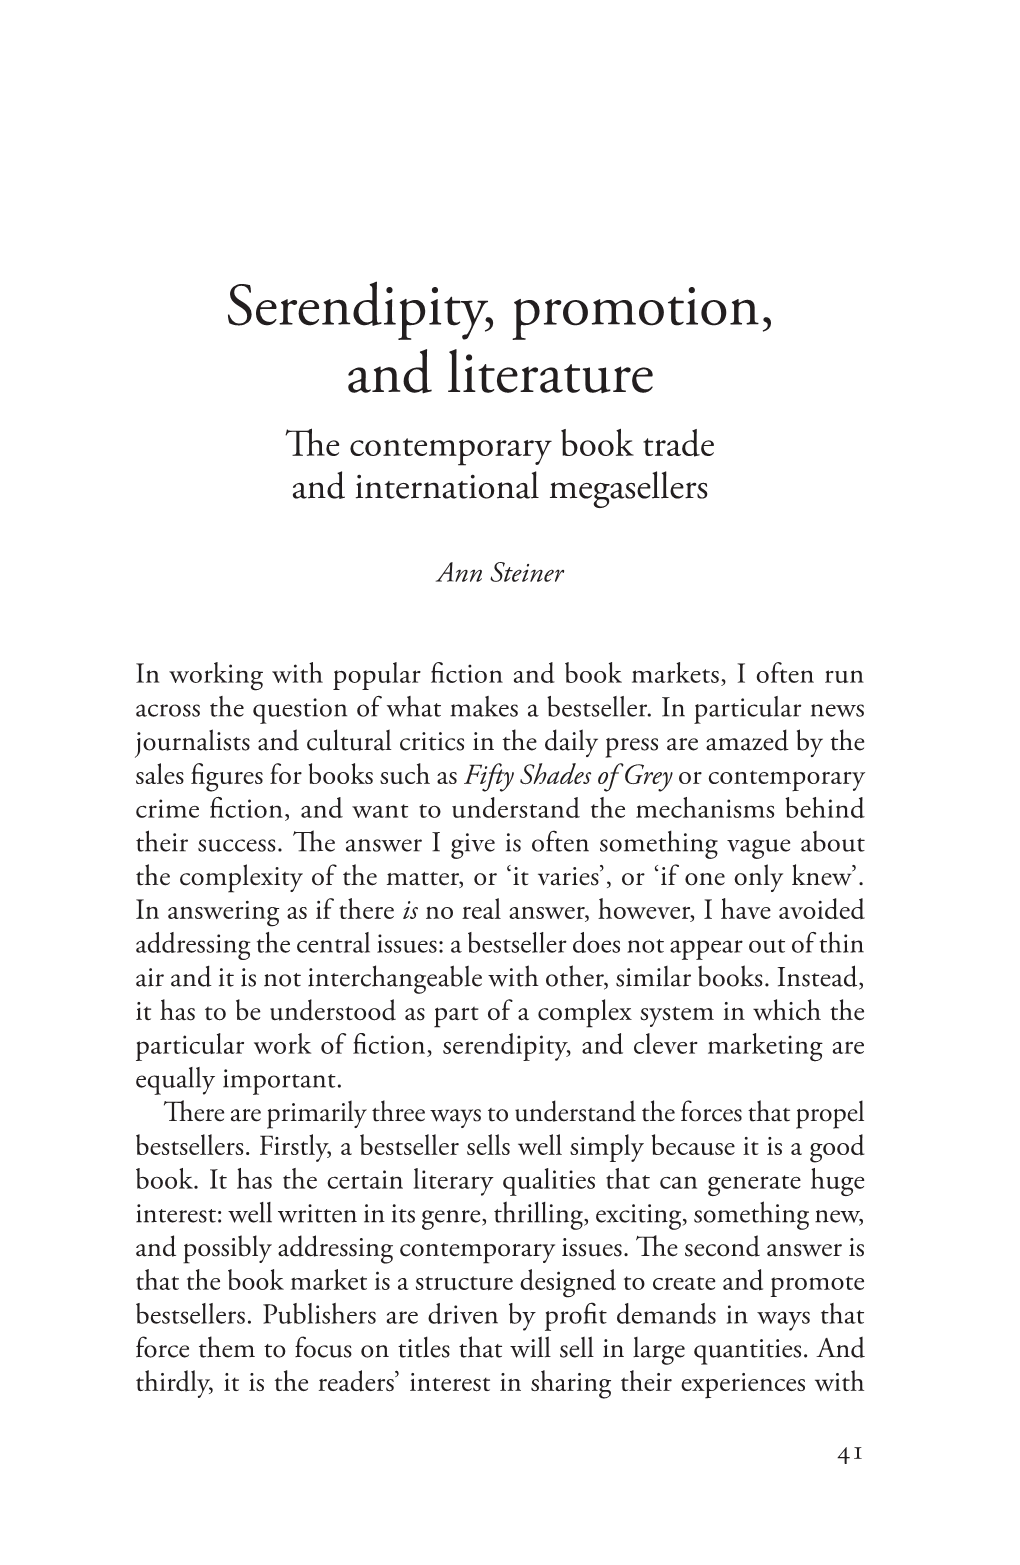 Serendipity, Promotion, and Literature the Contemporary Book Trade and International Megasellers